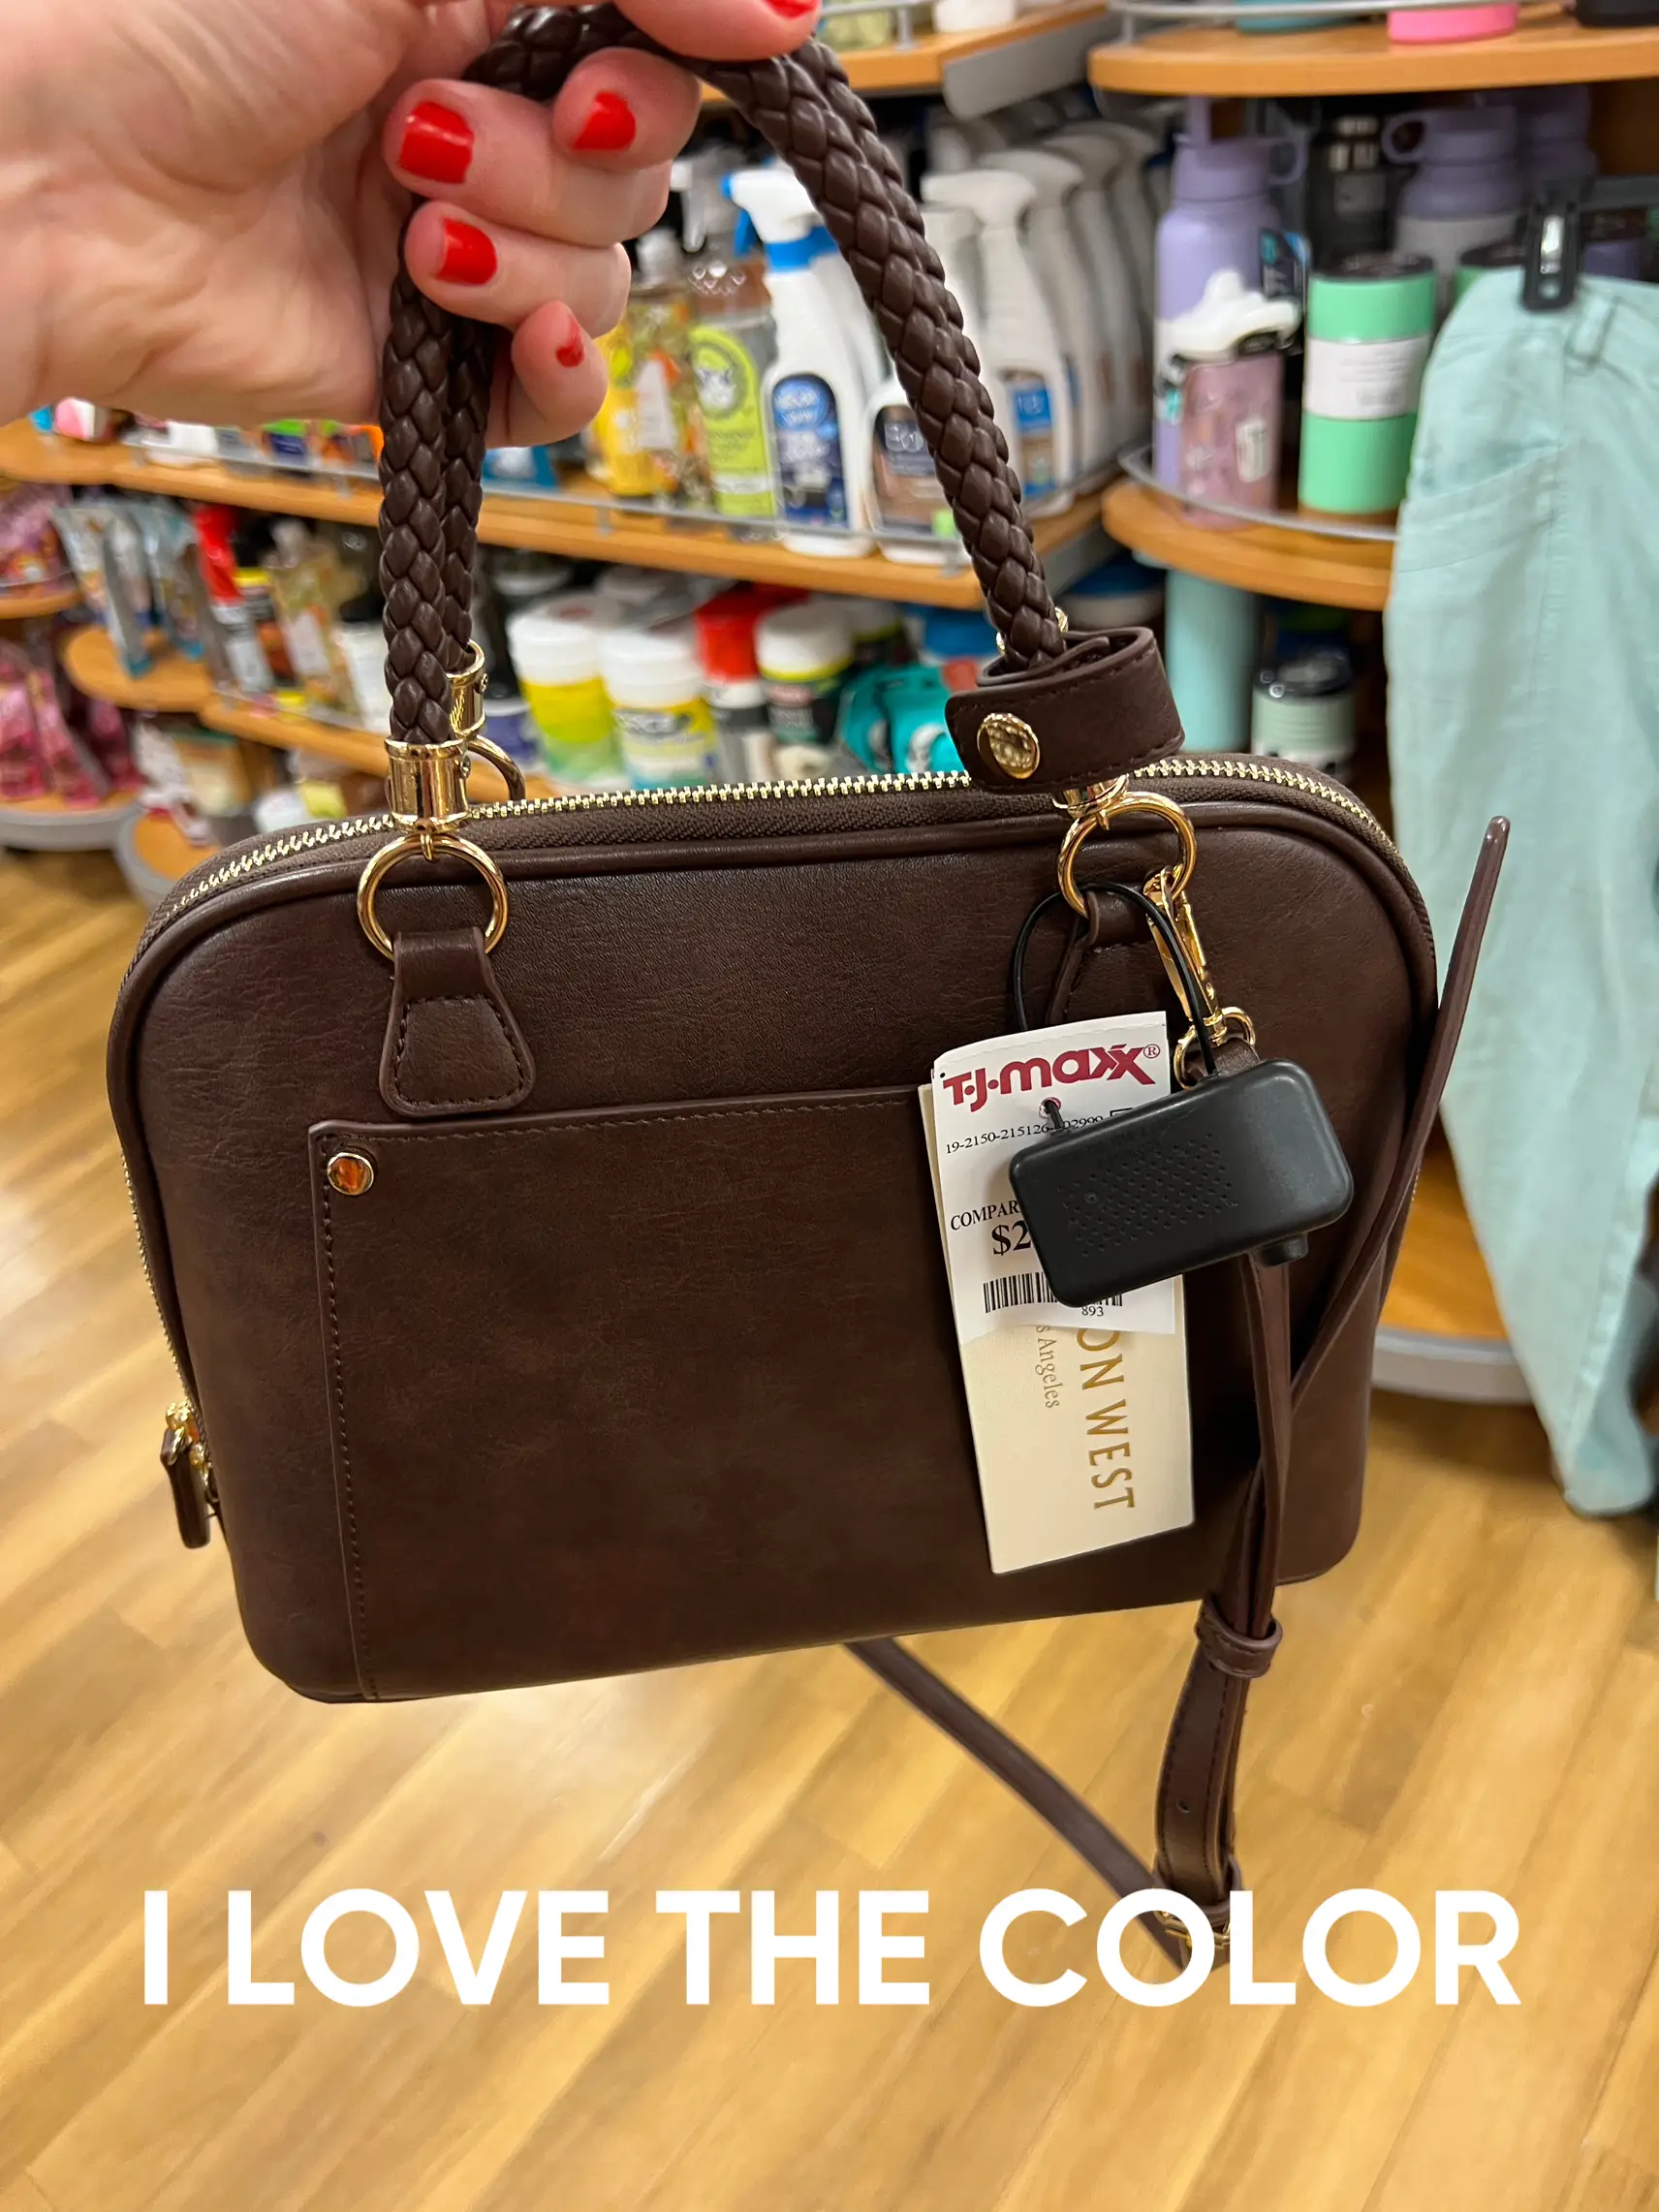 I went to TJ Maxx this morning and I found this cute crossbody bag